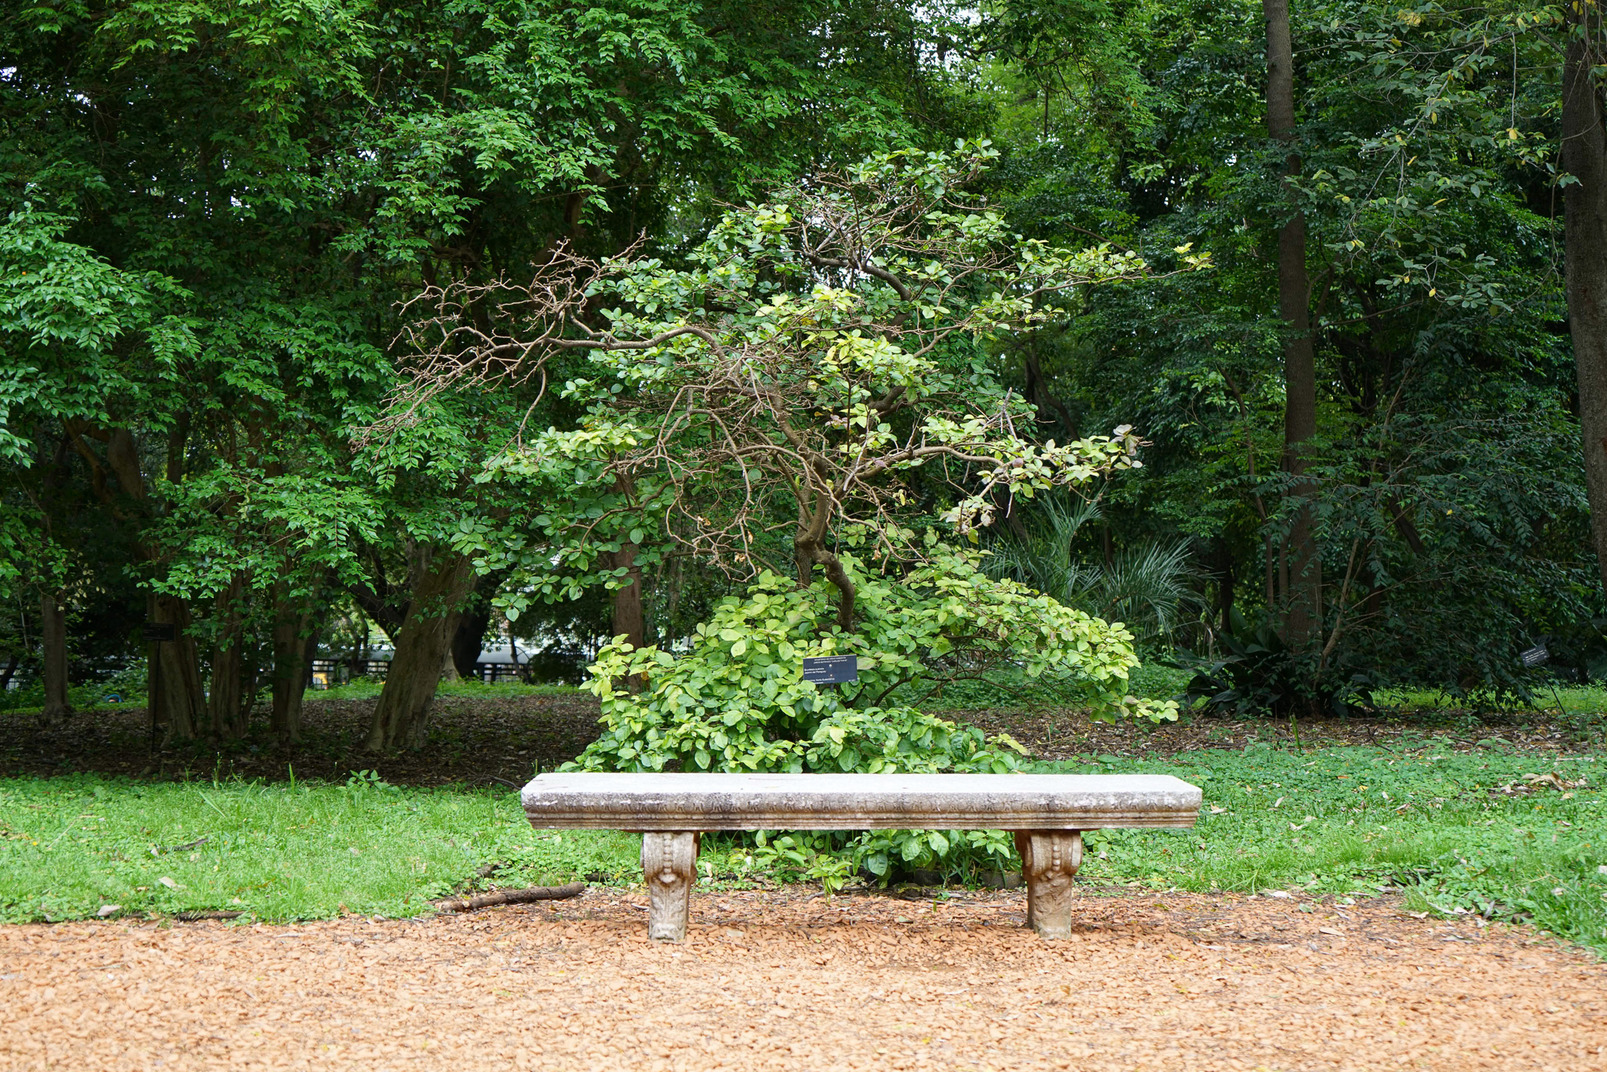 Bench in the garden is just a perfect place